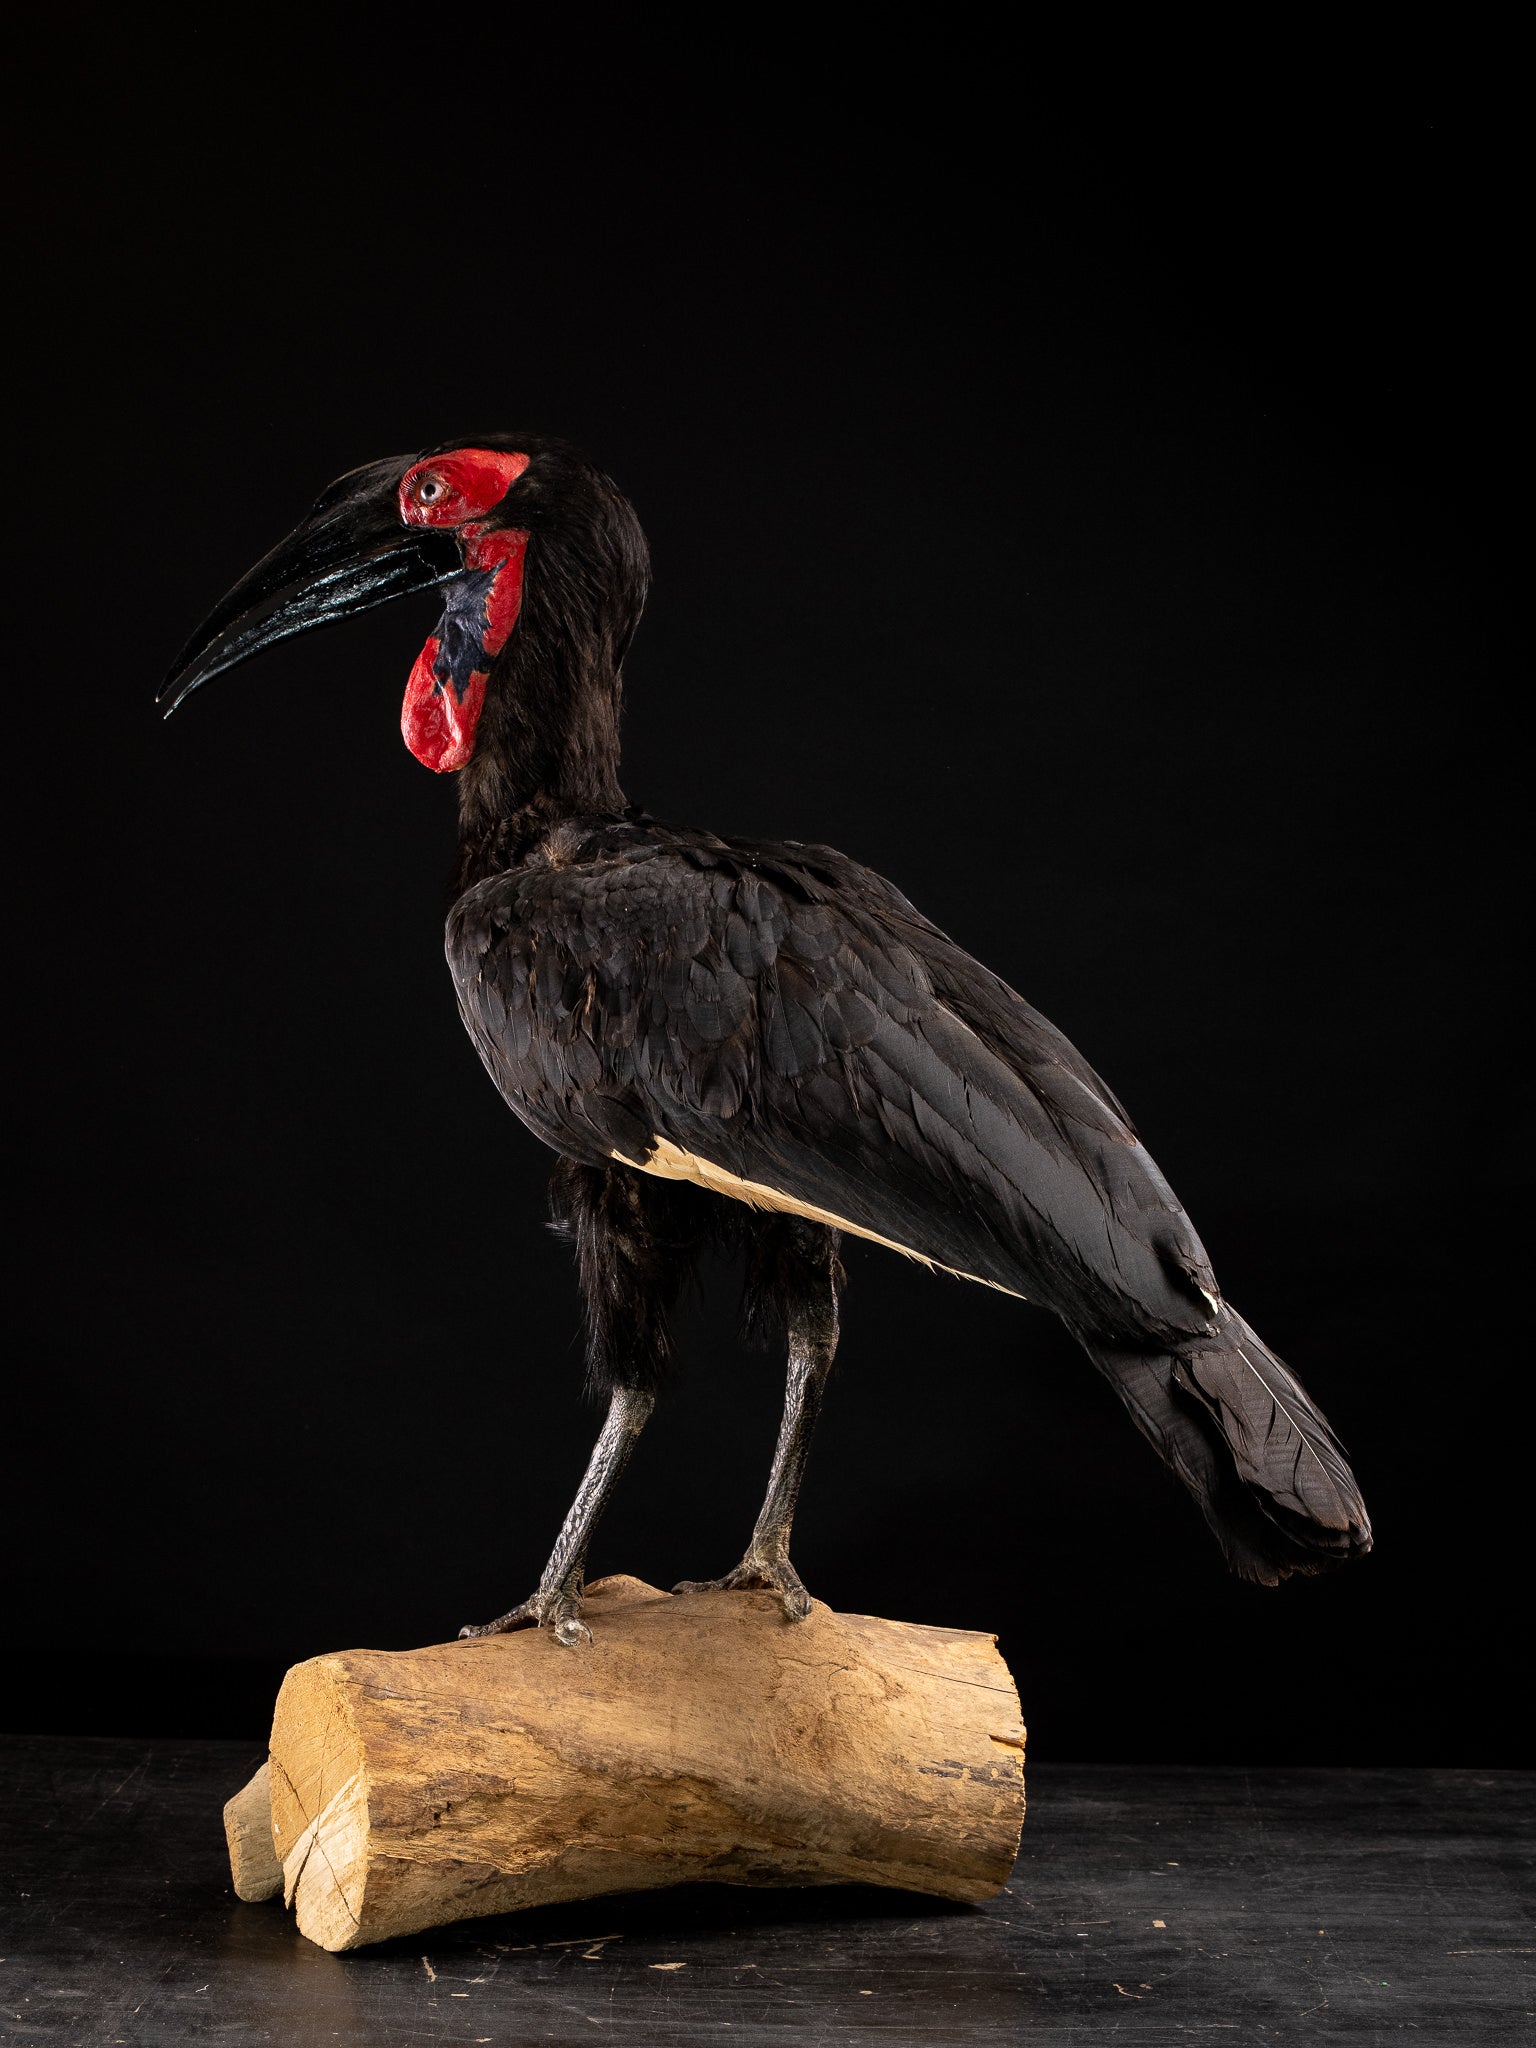 Abyssinian Ground Hornbill taxidermy on a Natural base-Bucorvus abyssinicus (Cites NL)

Provenance: Private collection Brussels

The Ground Hornbill is a particularly spectacular representative of its avian family. It is a very large hornbill